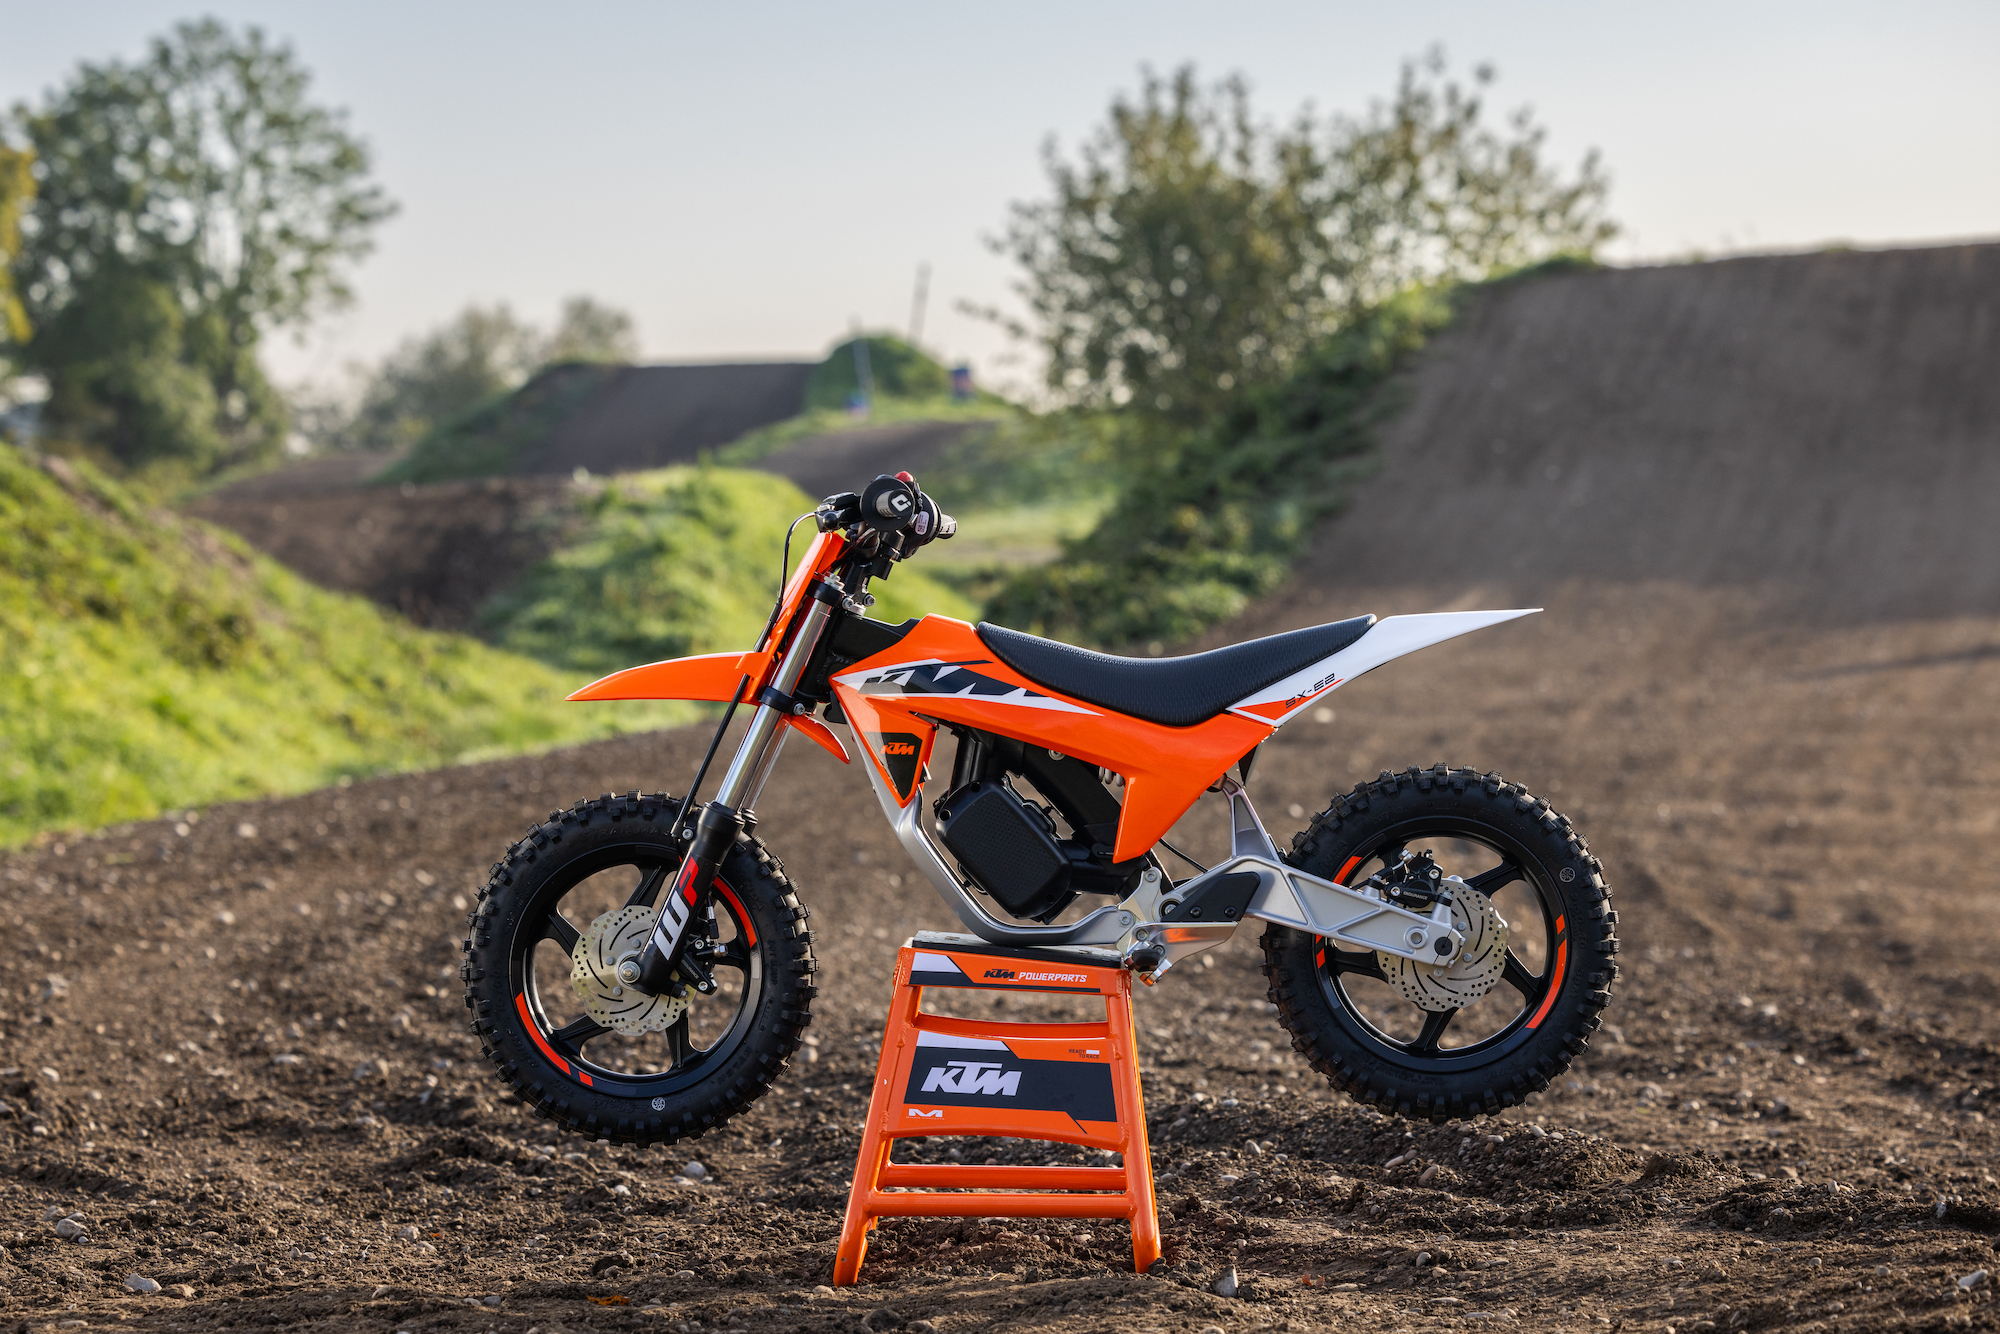 A view of KTM's all-new SX-E 2 racer. All media provided by KTM.